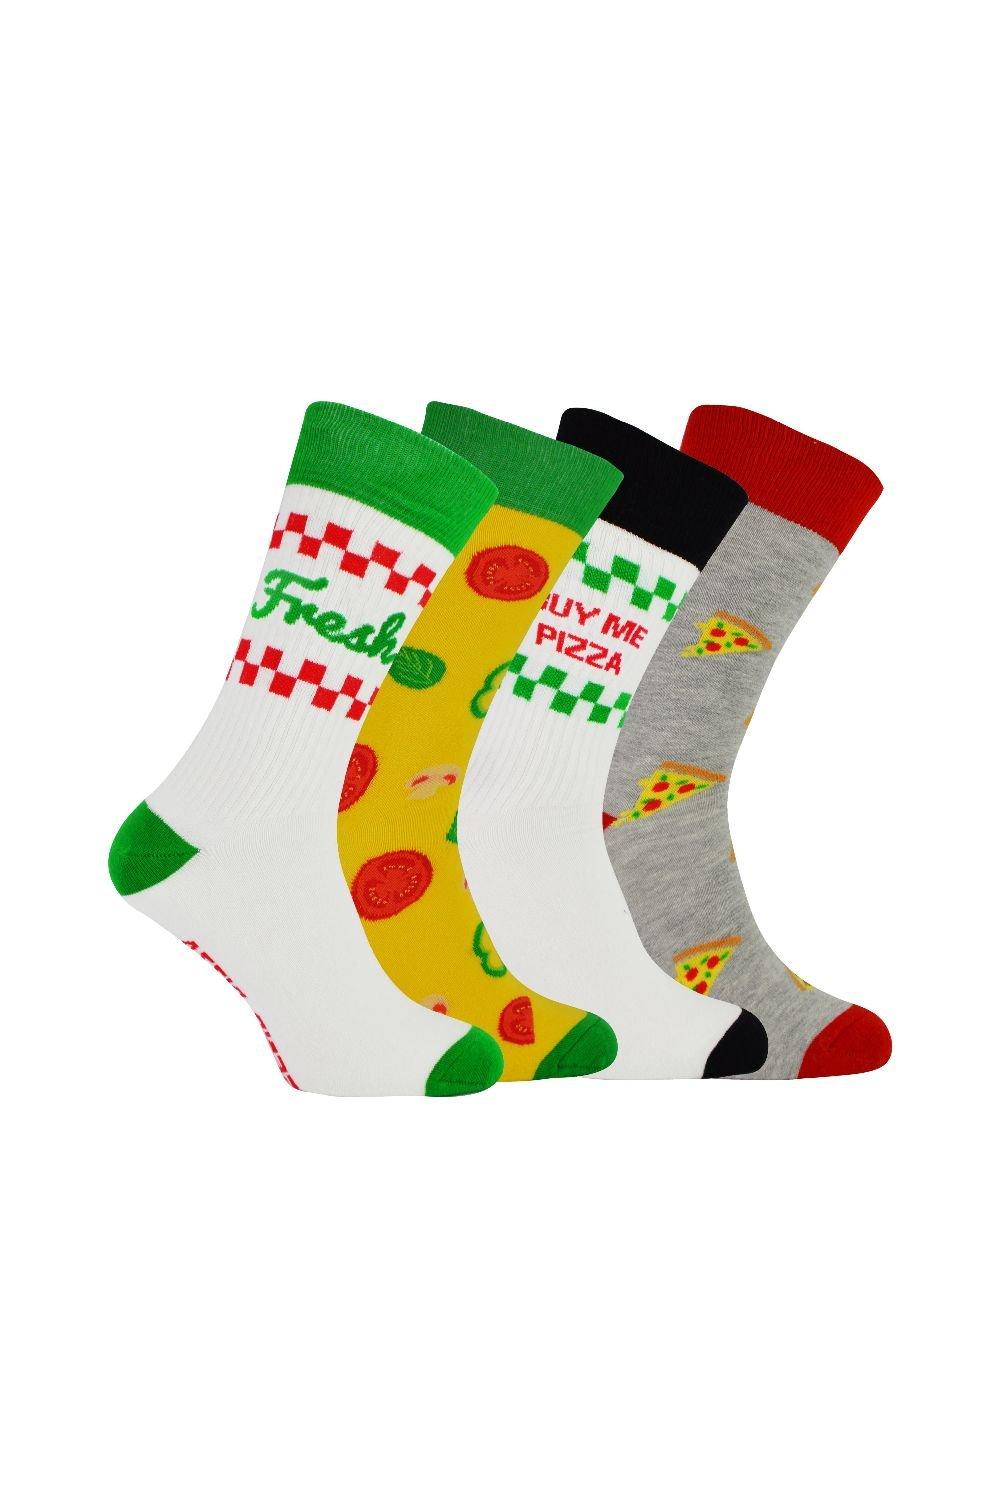 4 Pairs Novelty Soft Cotton Pizza Socks Socks in a Gift Box